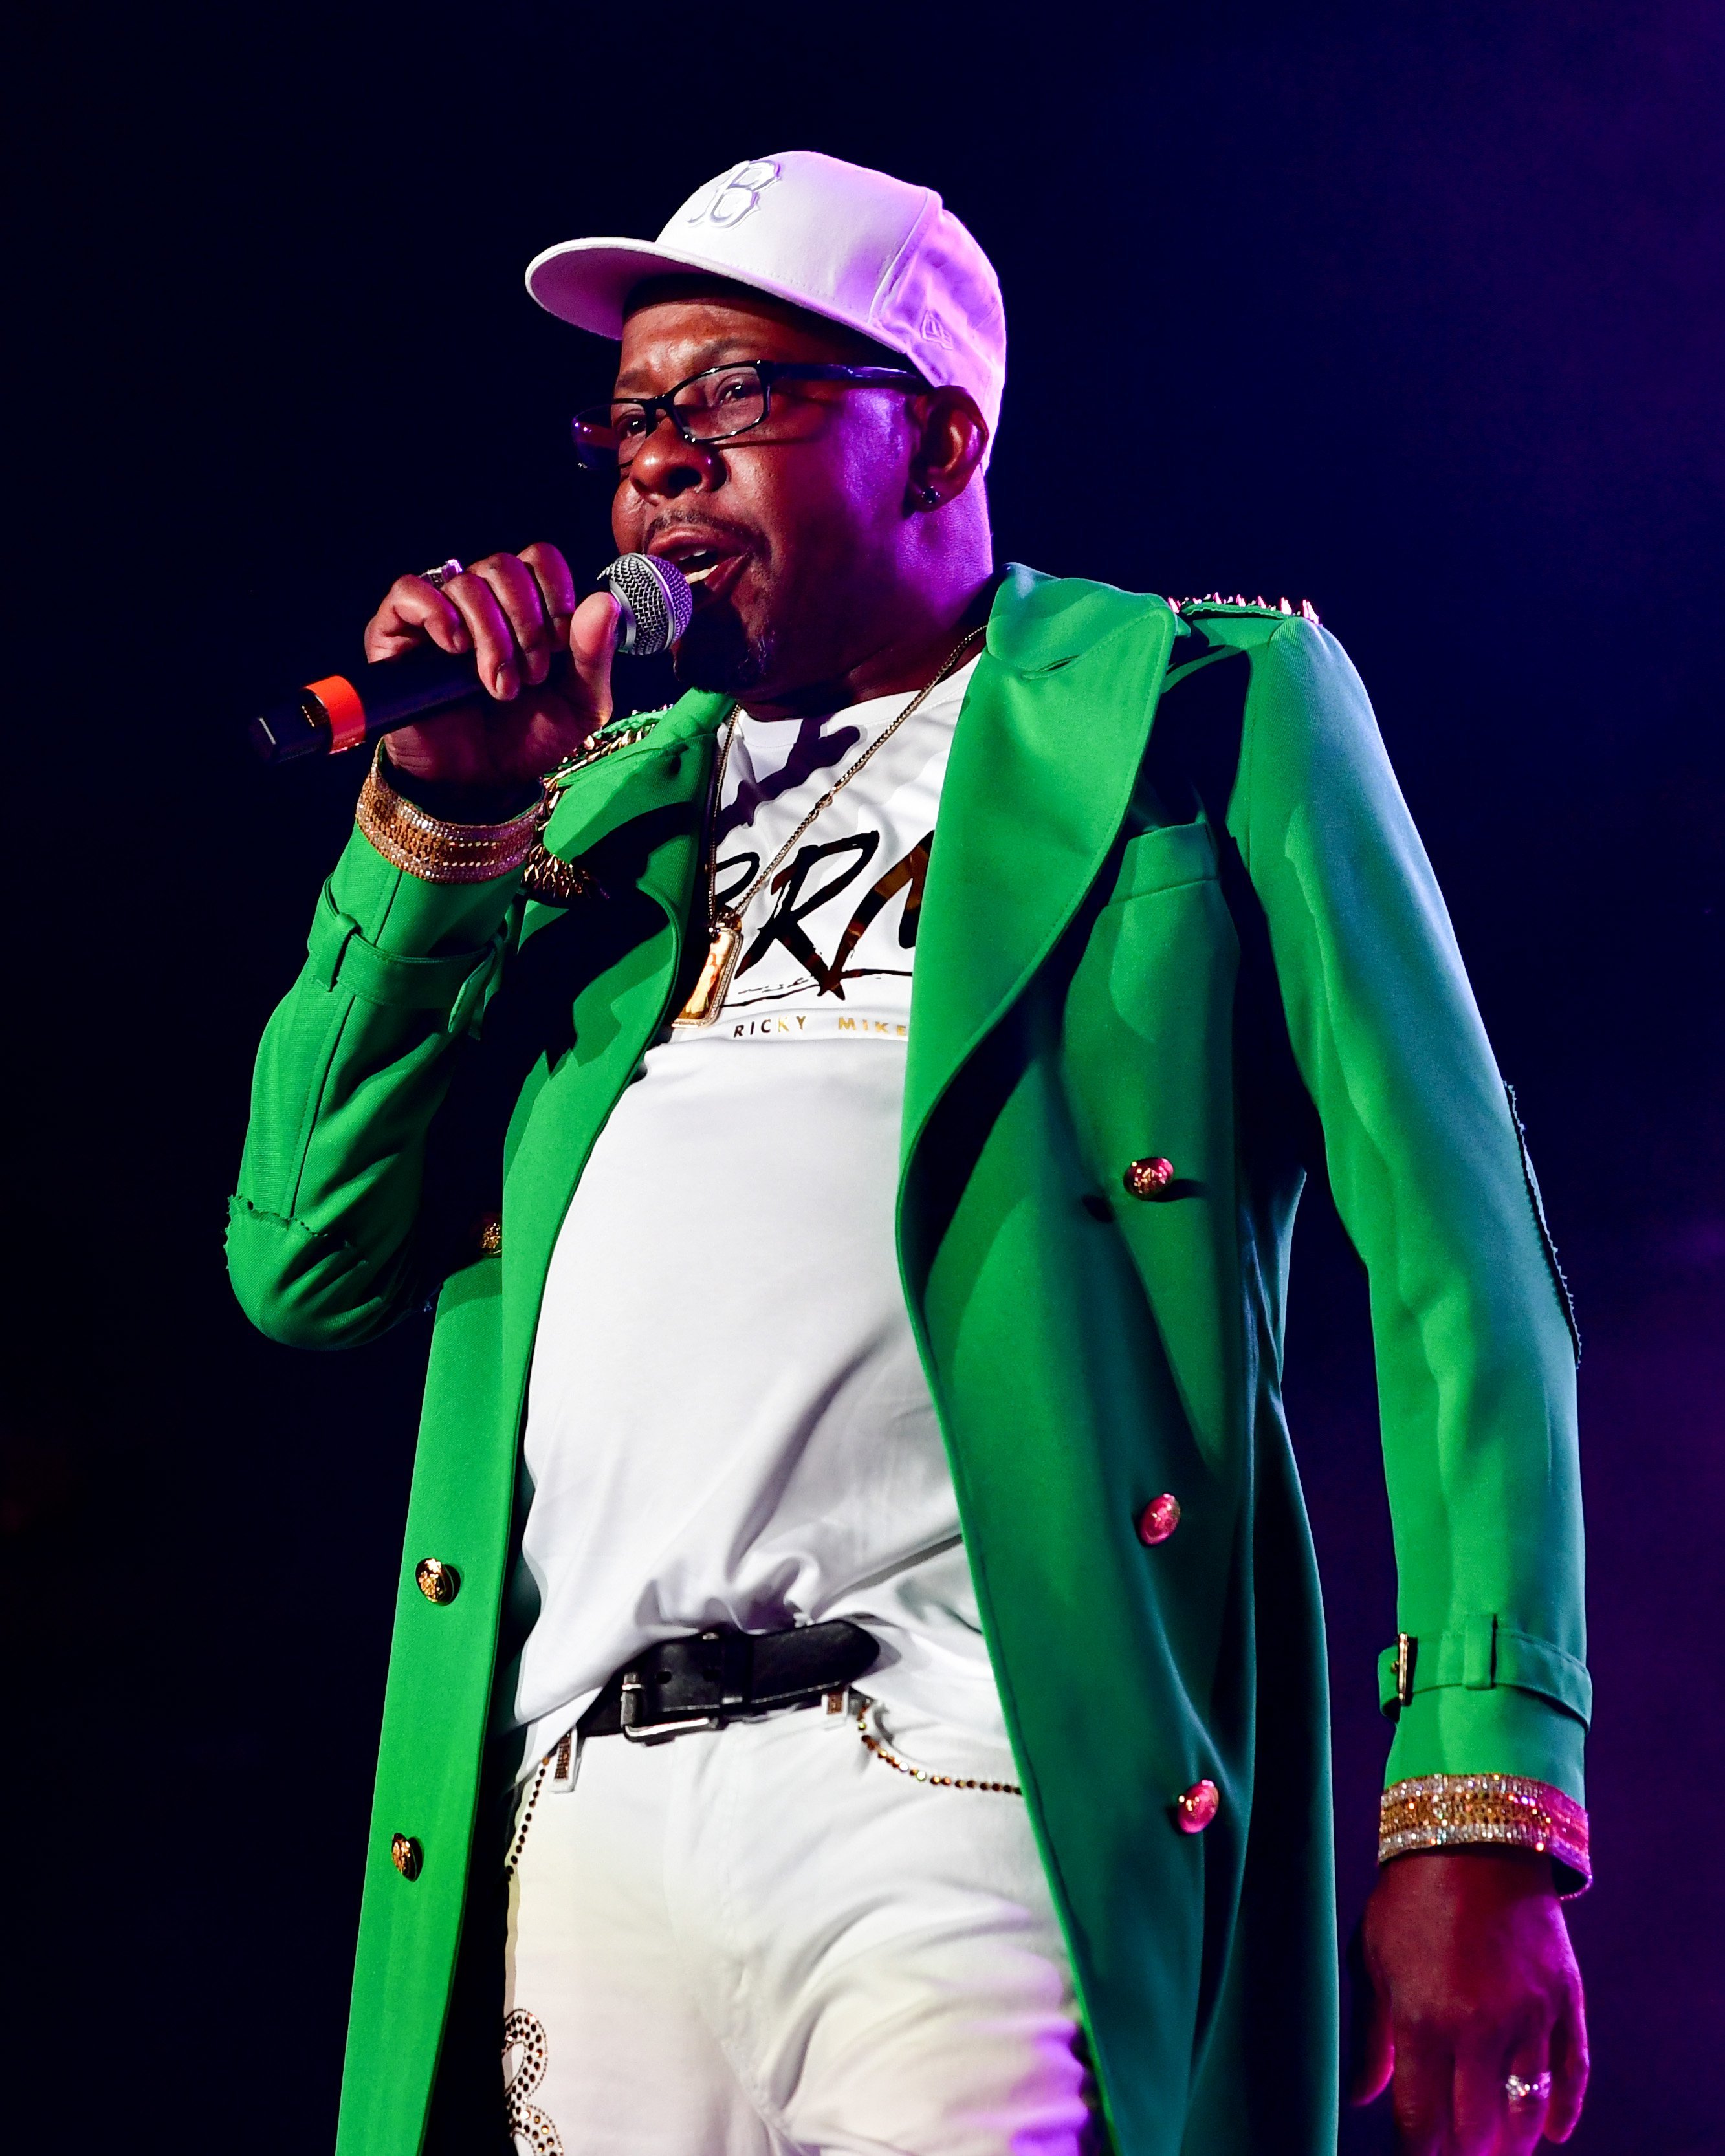 Bobby Brown performs during the ESSENCE Festival on July 05, 2019 in Louisiana | Photos: Getty Images